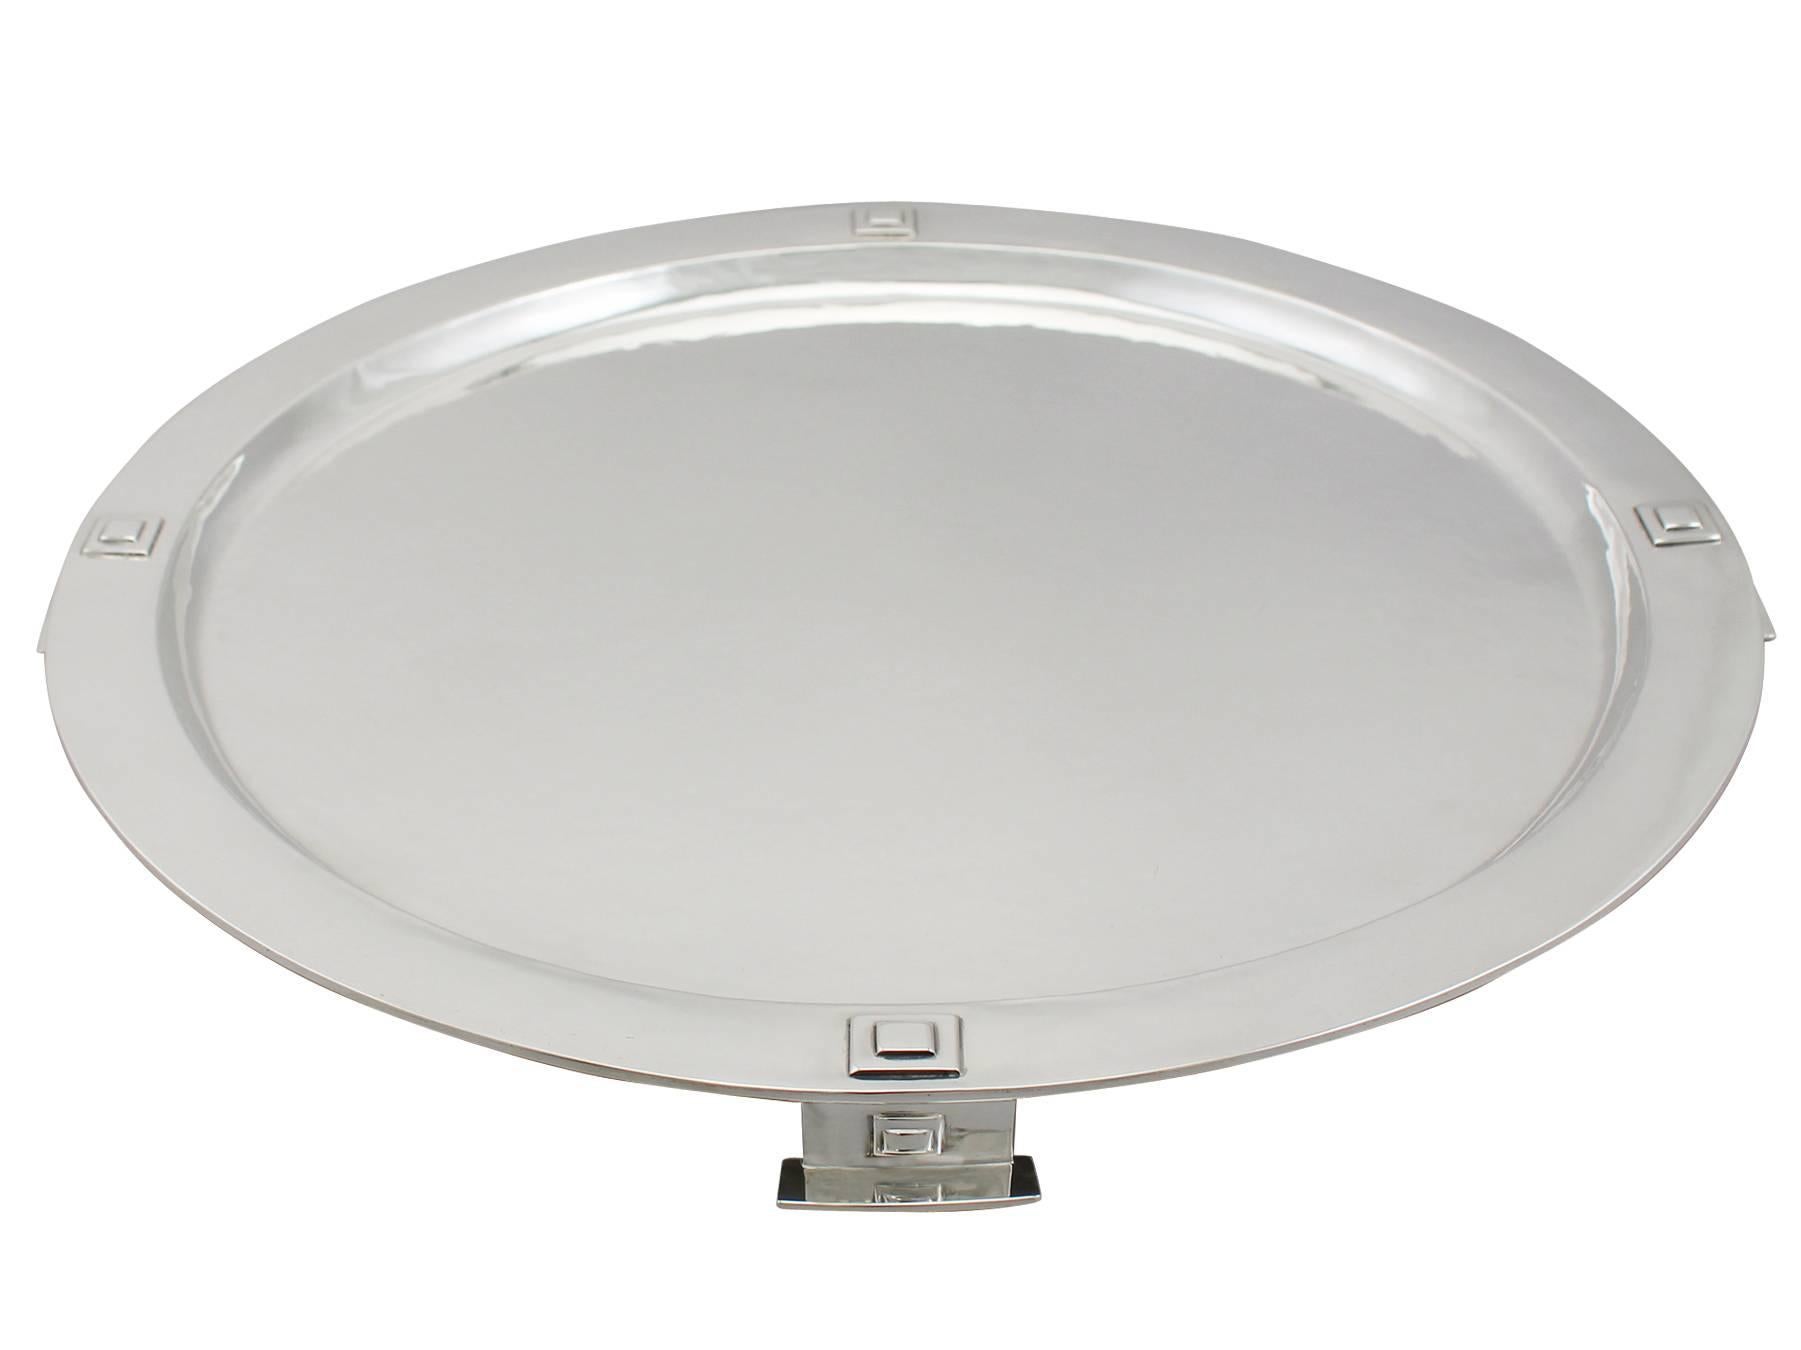 An exceptional, fine and impressive, large antique George V English sterling silver salver in the Arts & Crafts style; an addition to our silver dining collection.

This exceptional antique George V English sterling silver salver has a circular